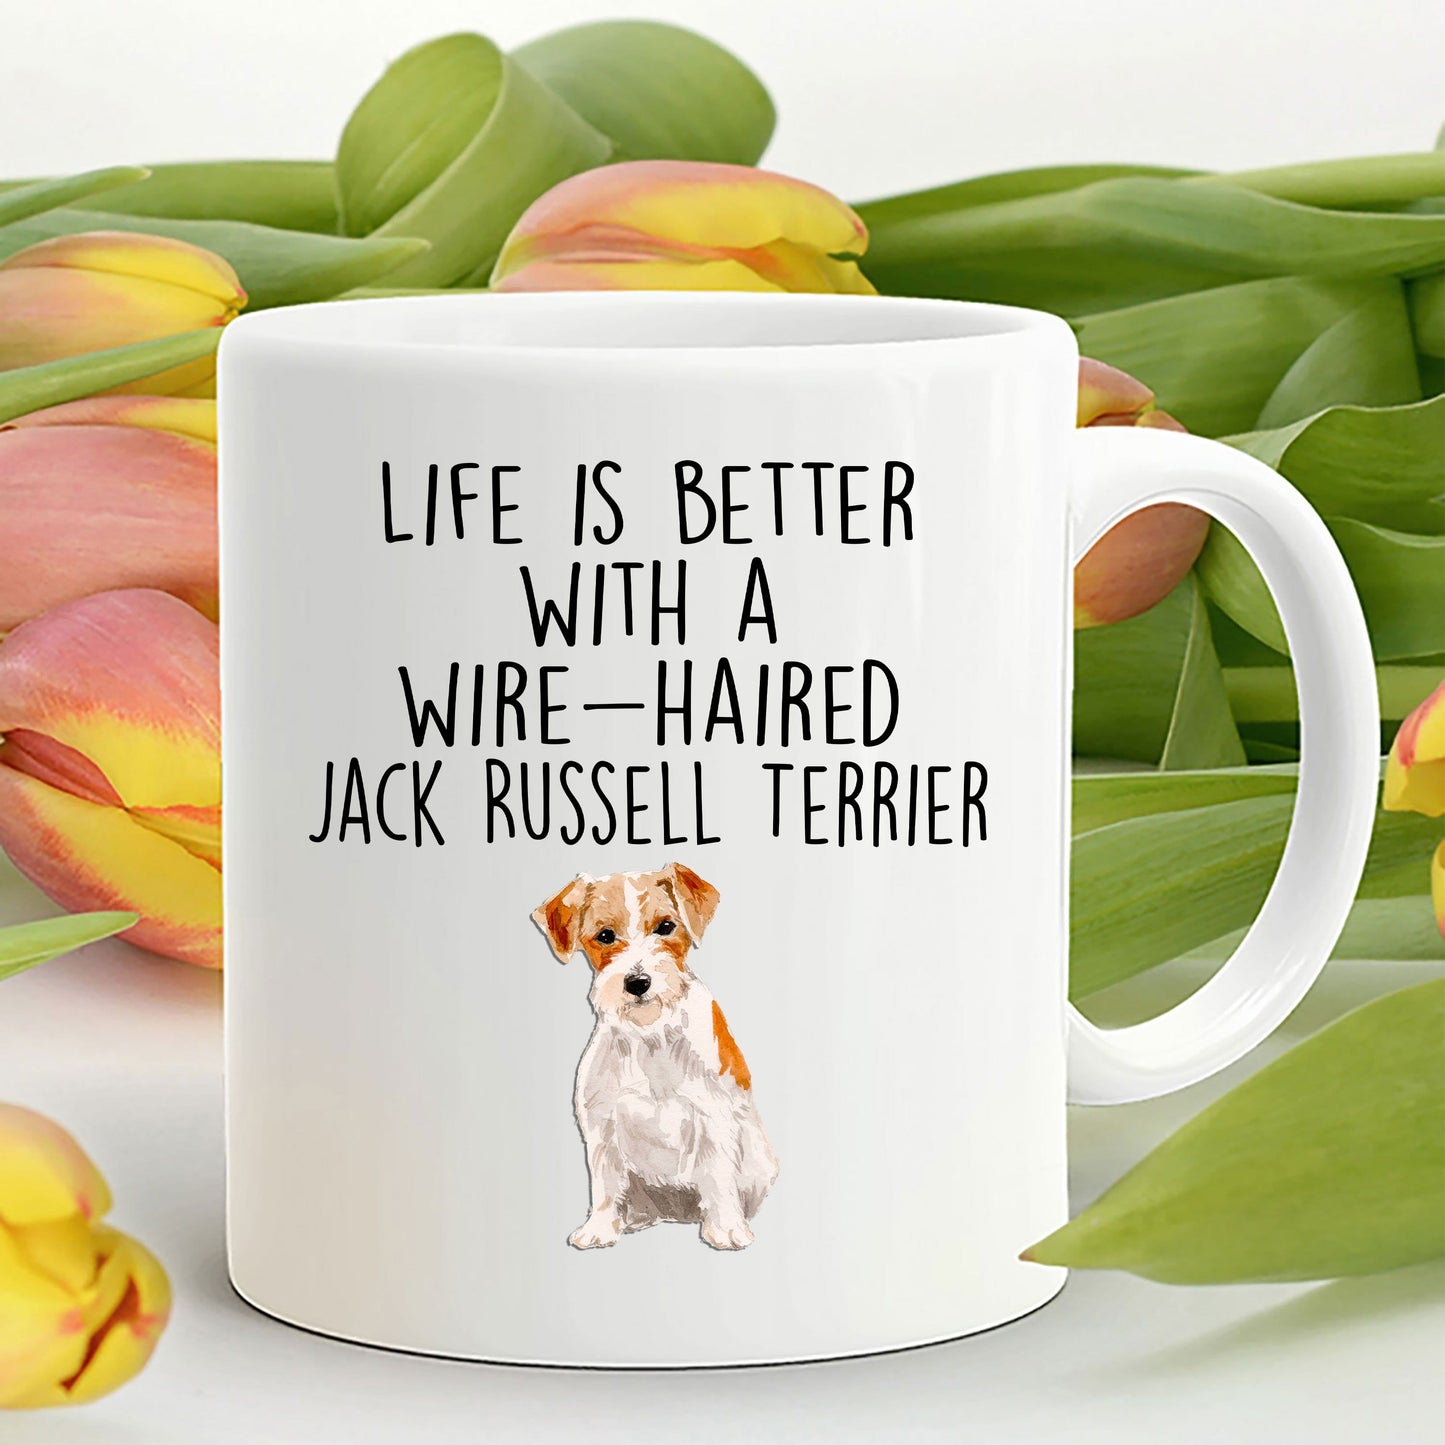 Wire-haired Jack Russell Terrier Dog Custom Ceramic Coffee Mug - Life is Better